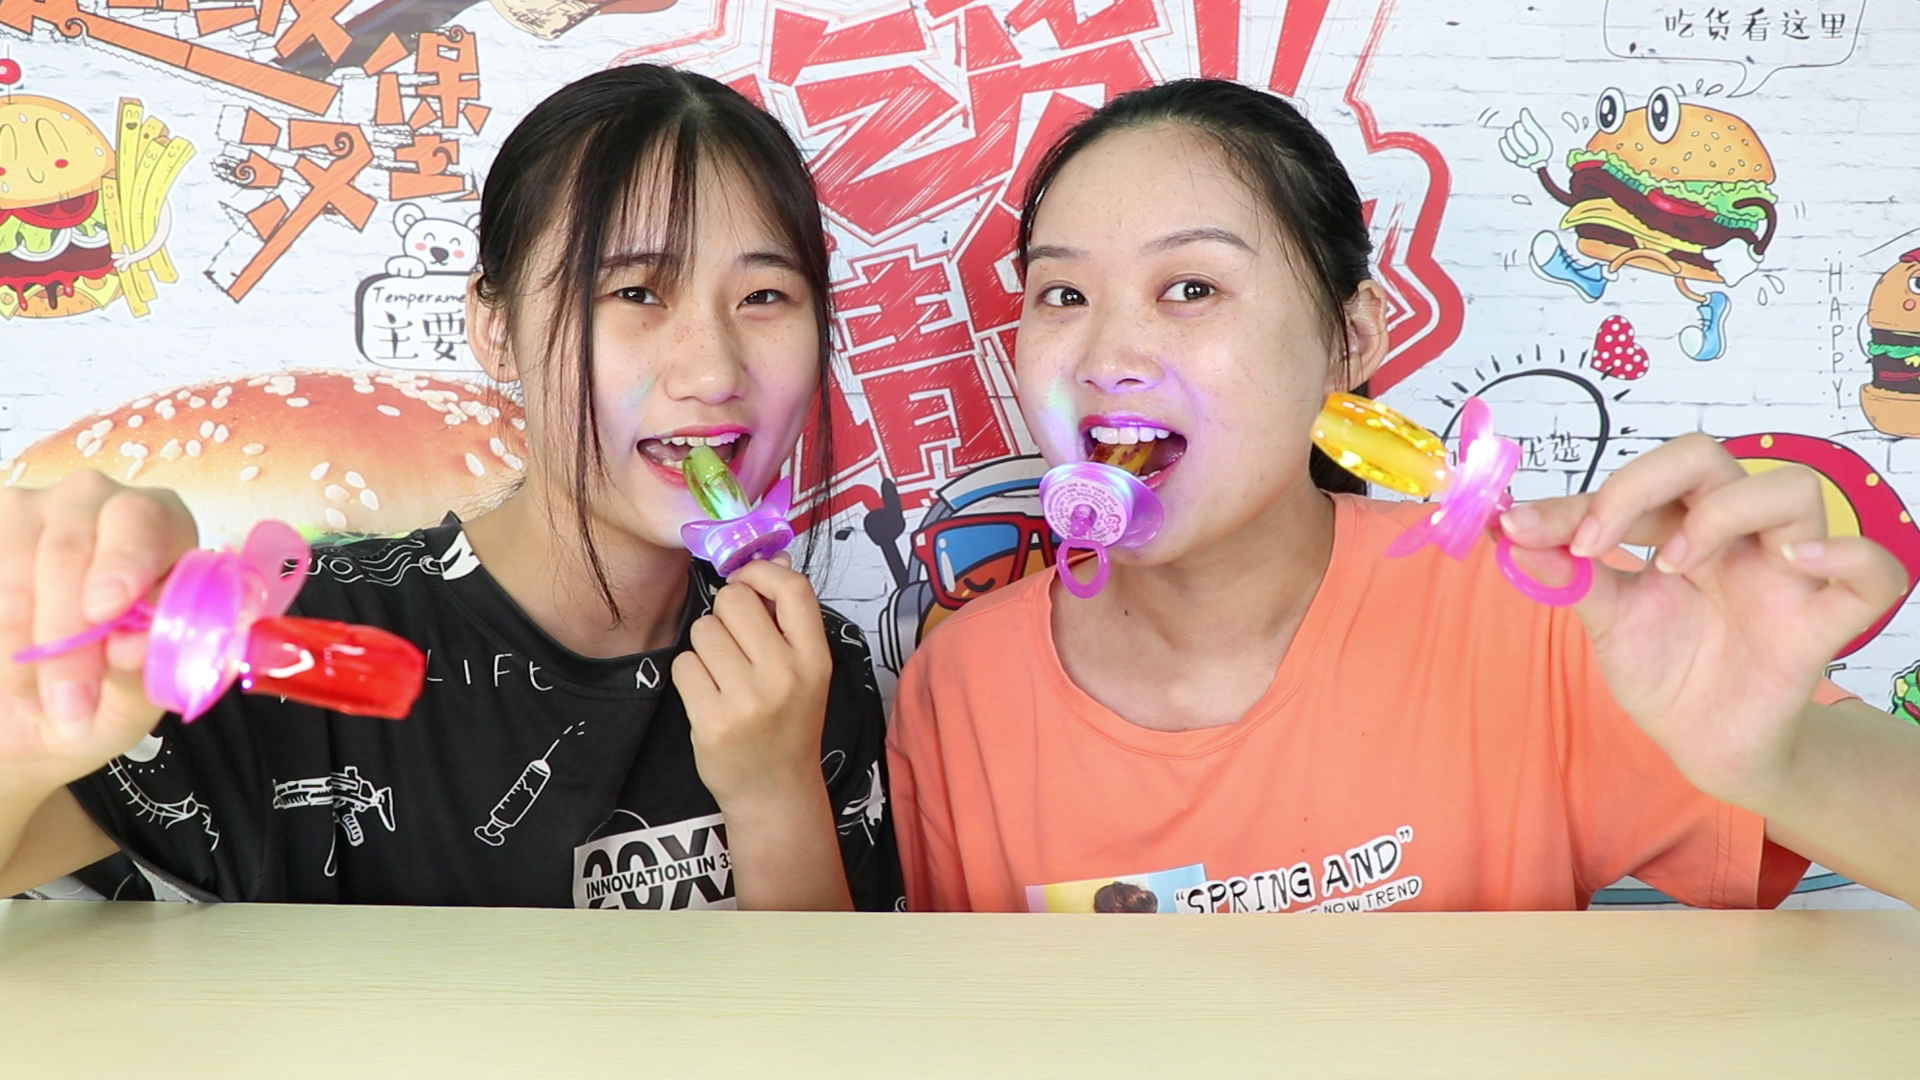 They eat "pacifier whistle candy", which can blow, wear and shine. It's sweet, funny and fun.